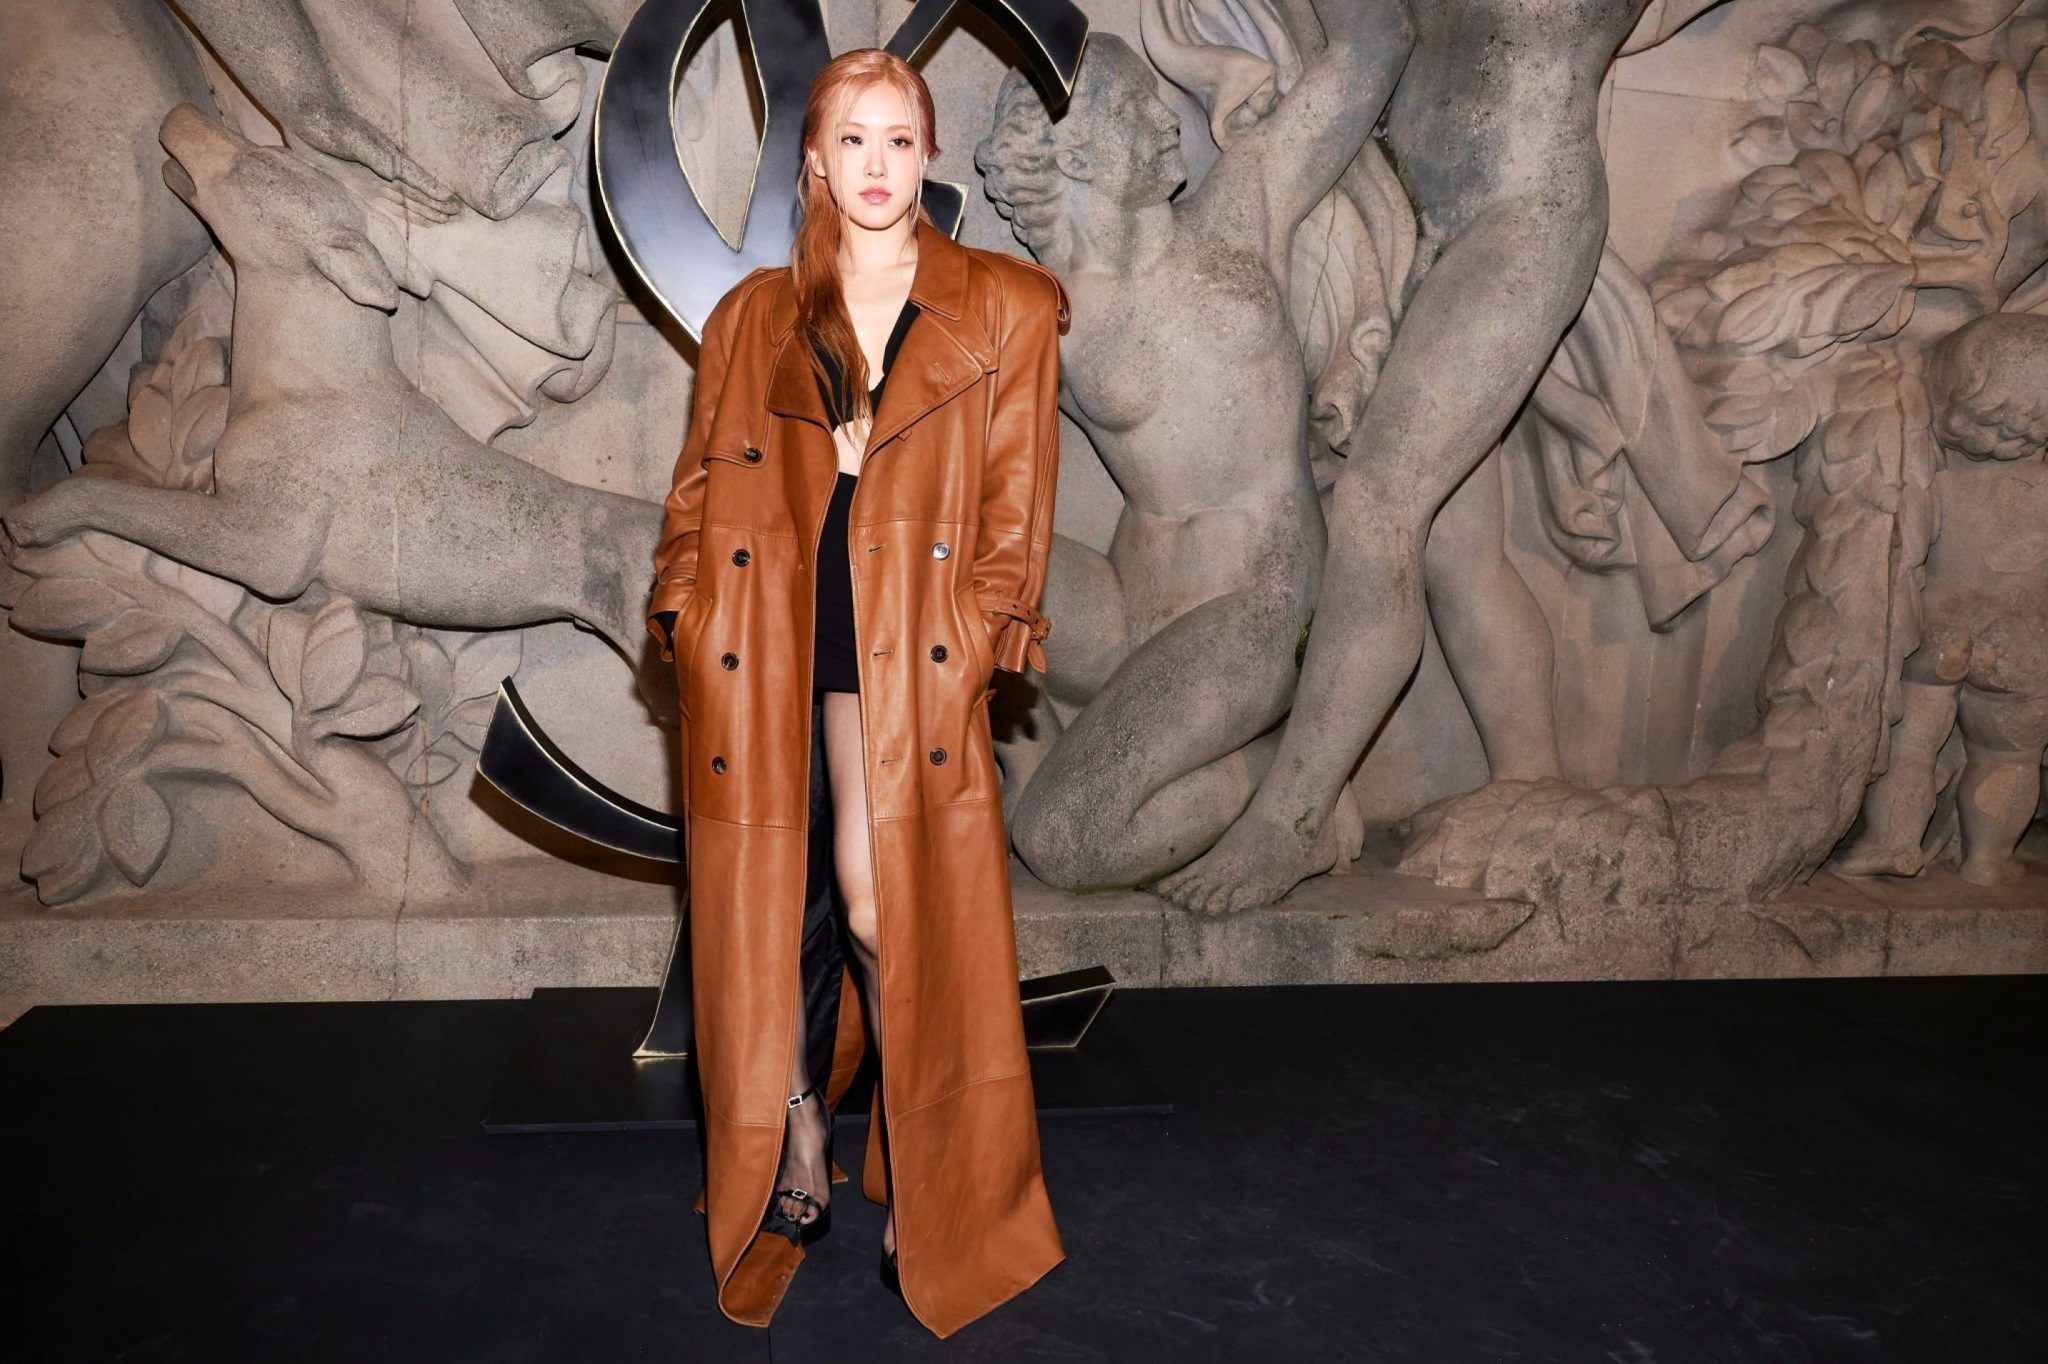 Rosé Blackpink glamorizes with menswear at the Saint Laurent fall winter 2023 show